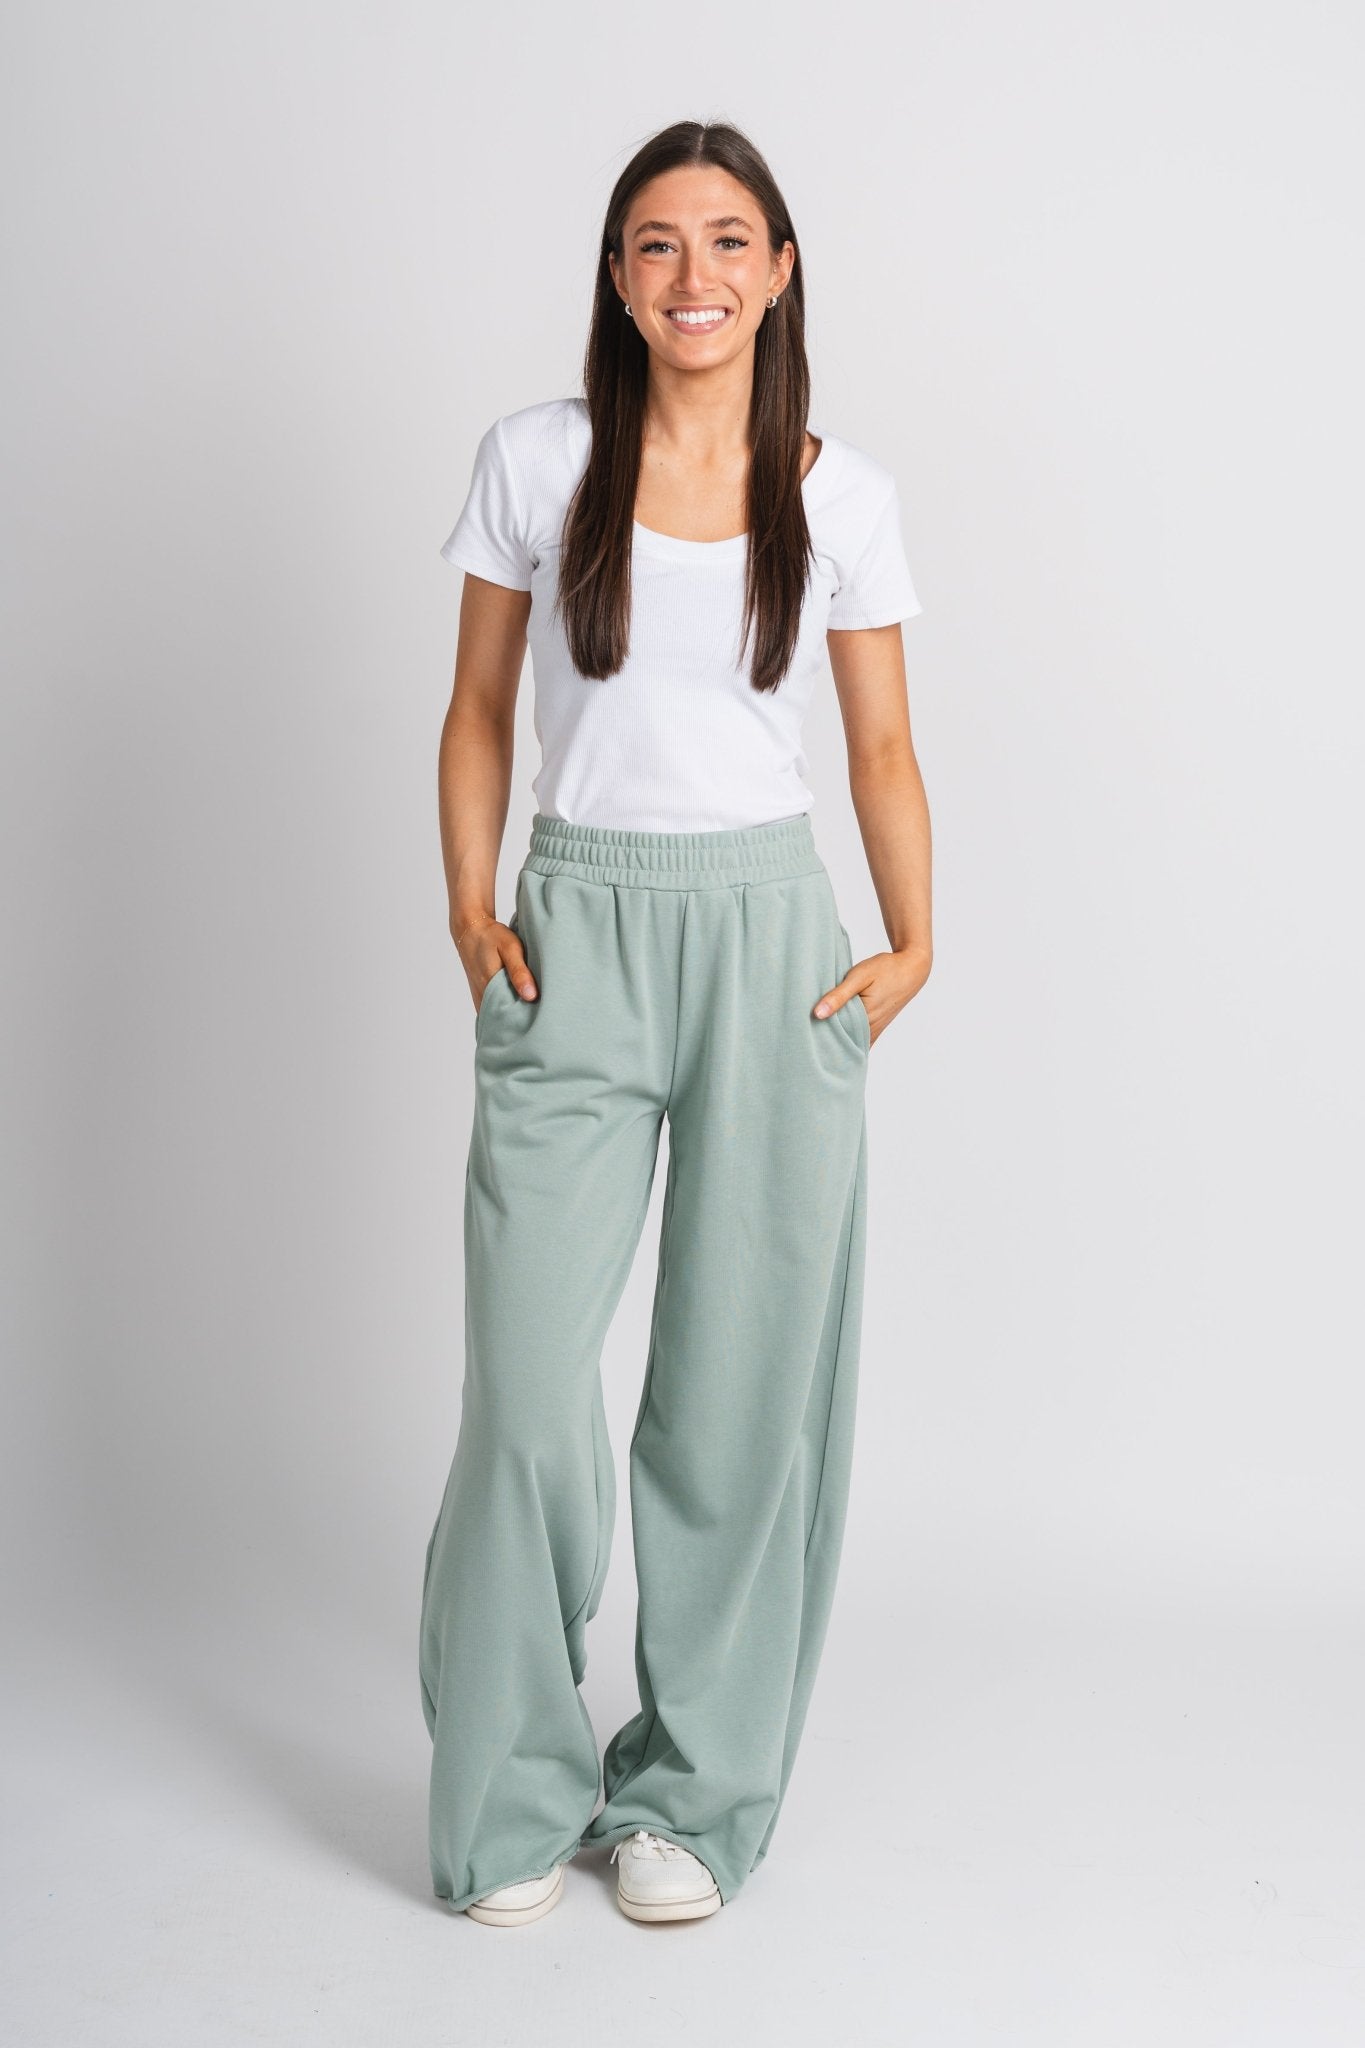 Vanessa wide leg lounge pant sage - Adorable Pants - Stylish Comfortable Outfits at Lush Fashion Lounge Boutique in OKC